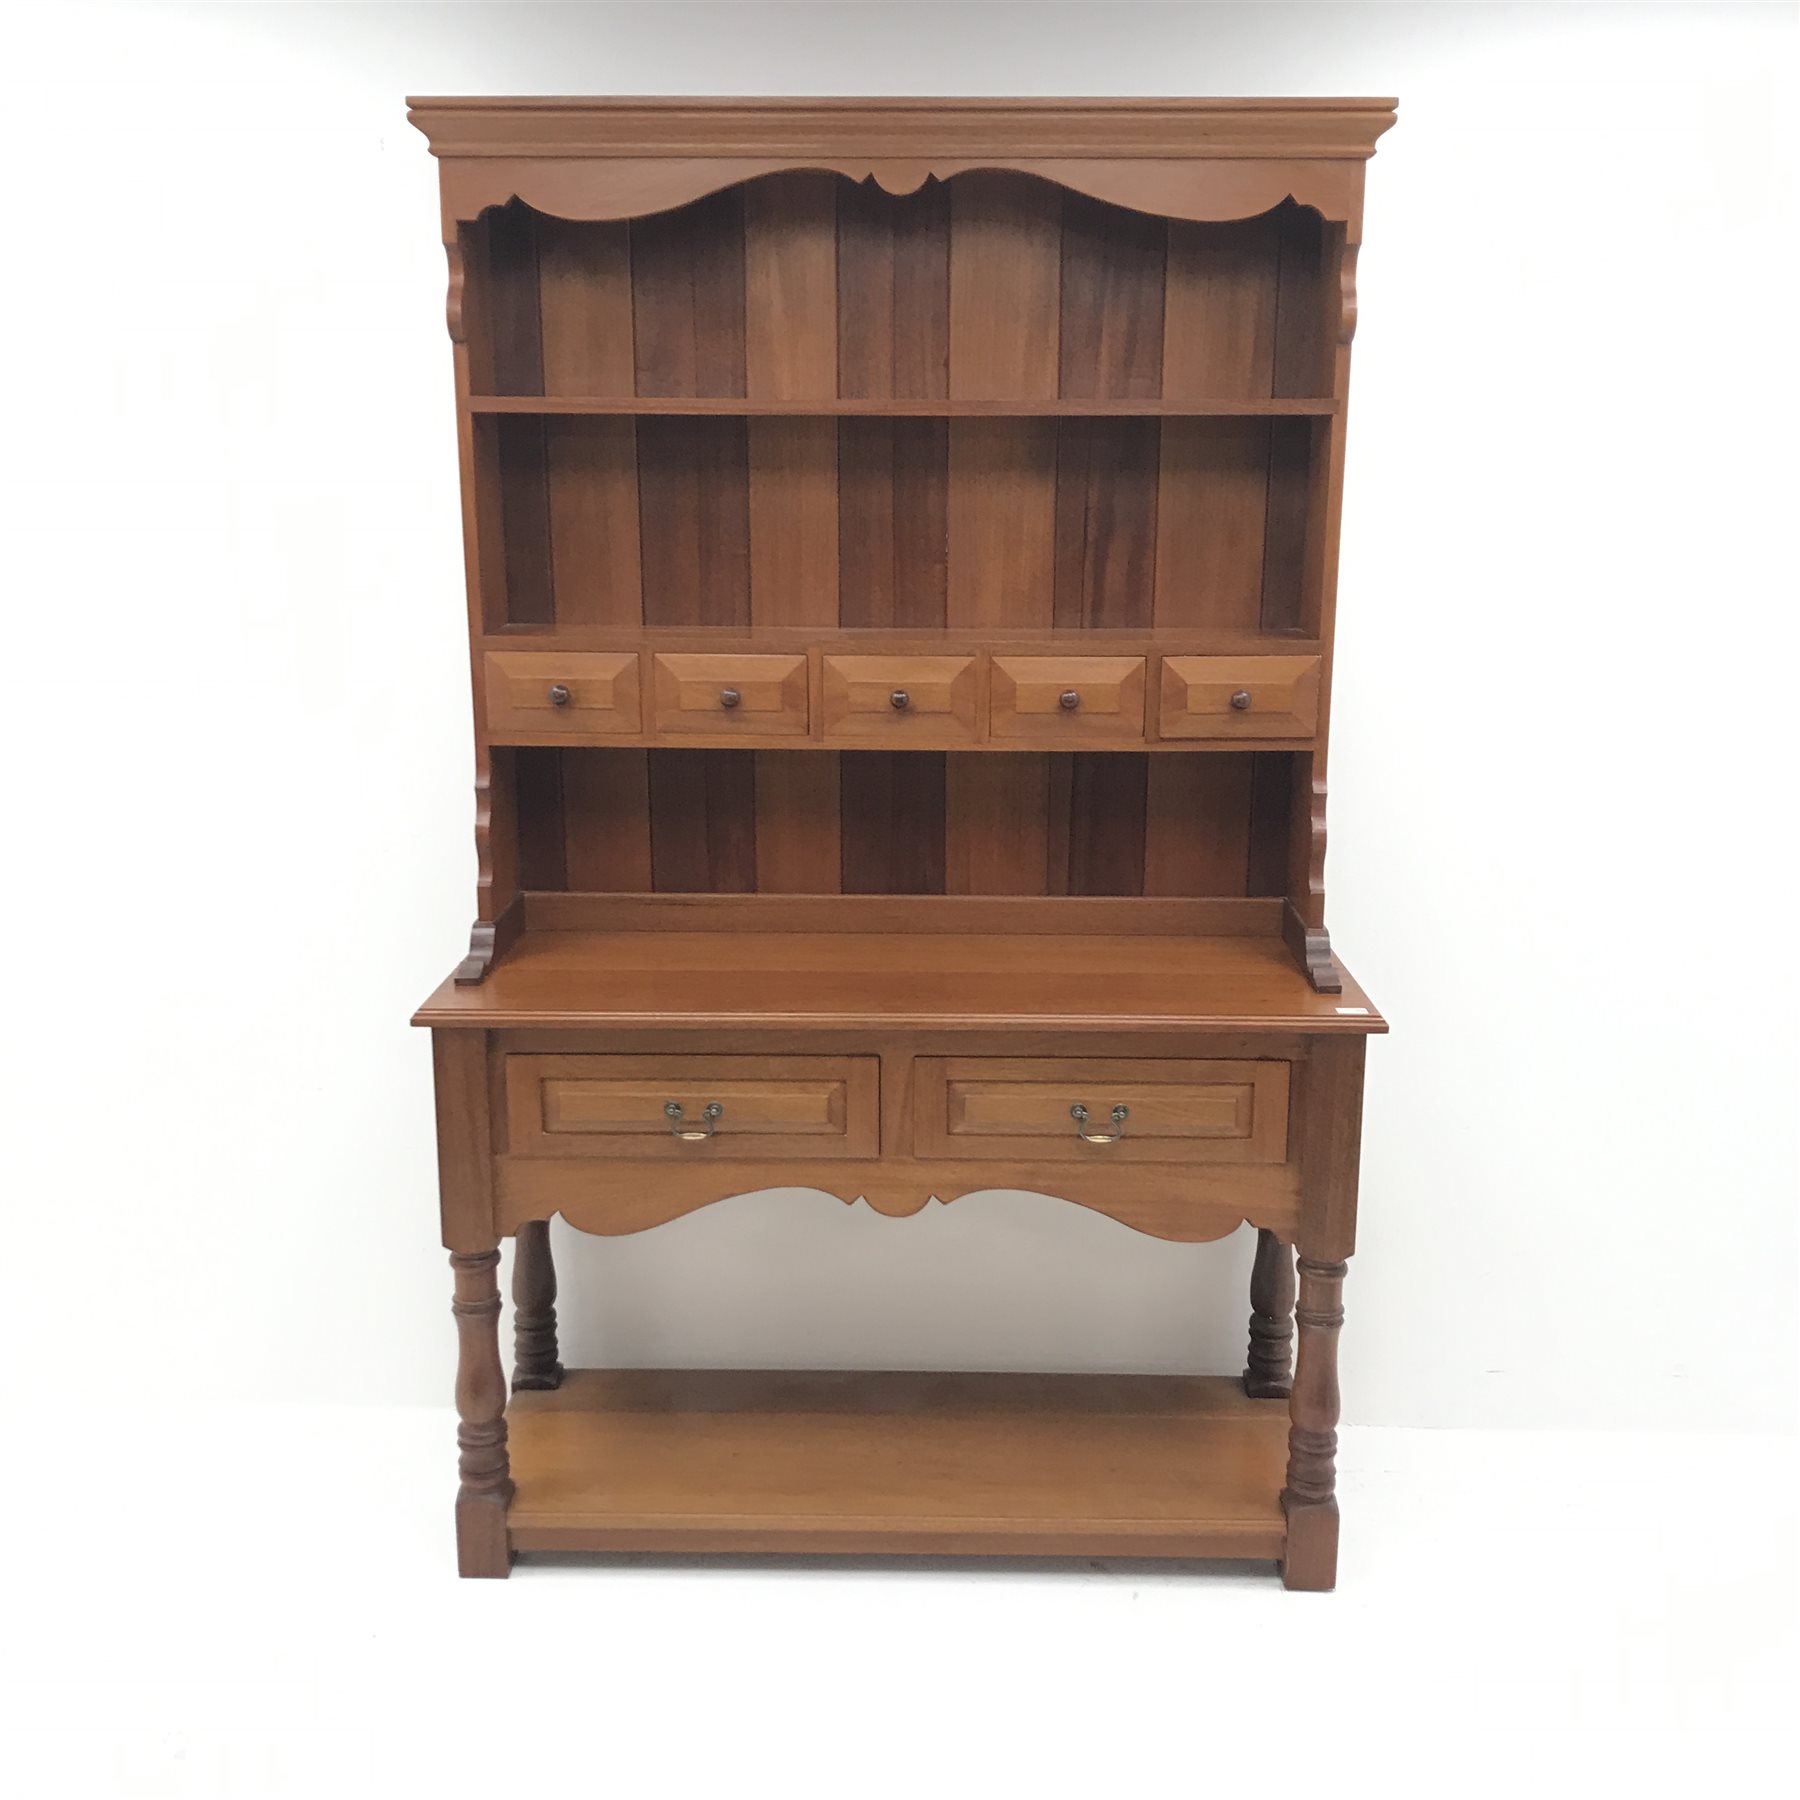 20th century mahogany dresser, raised two tier plate rack with five trinket and two drawers, turned - Image 3 of 10